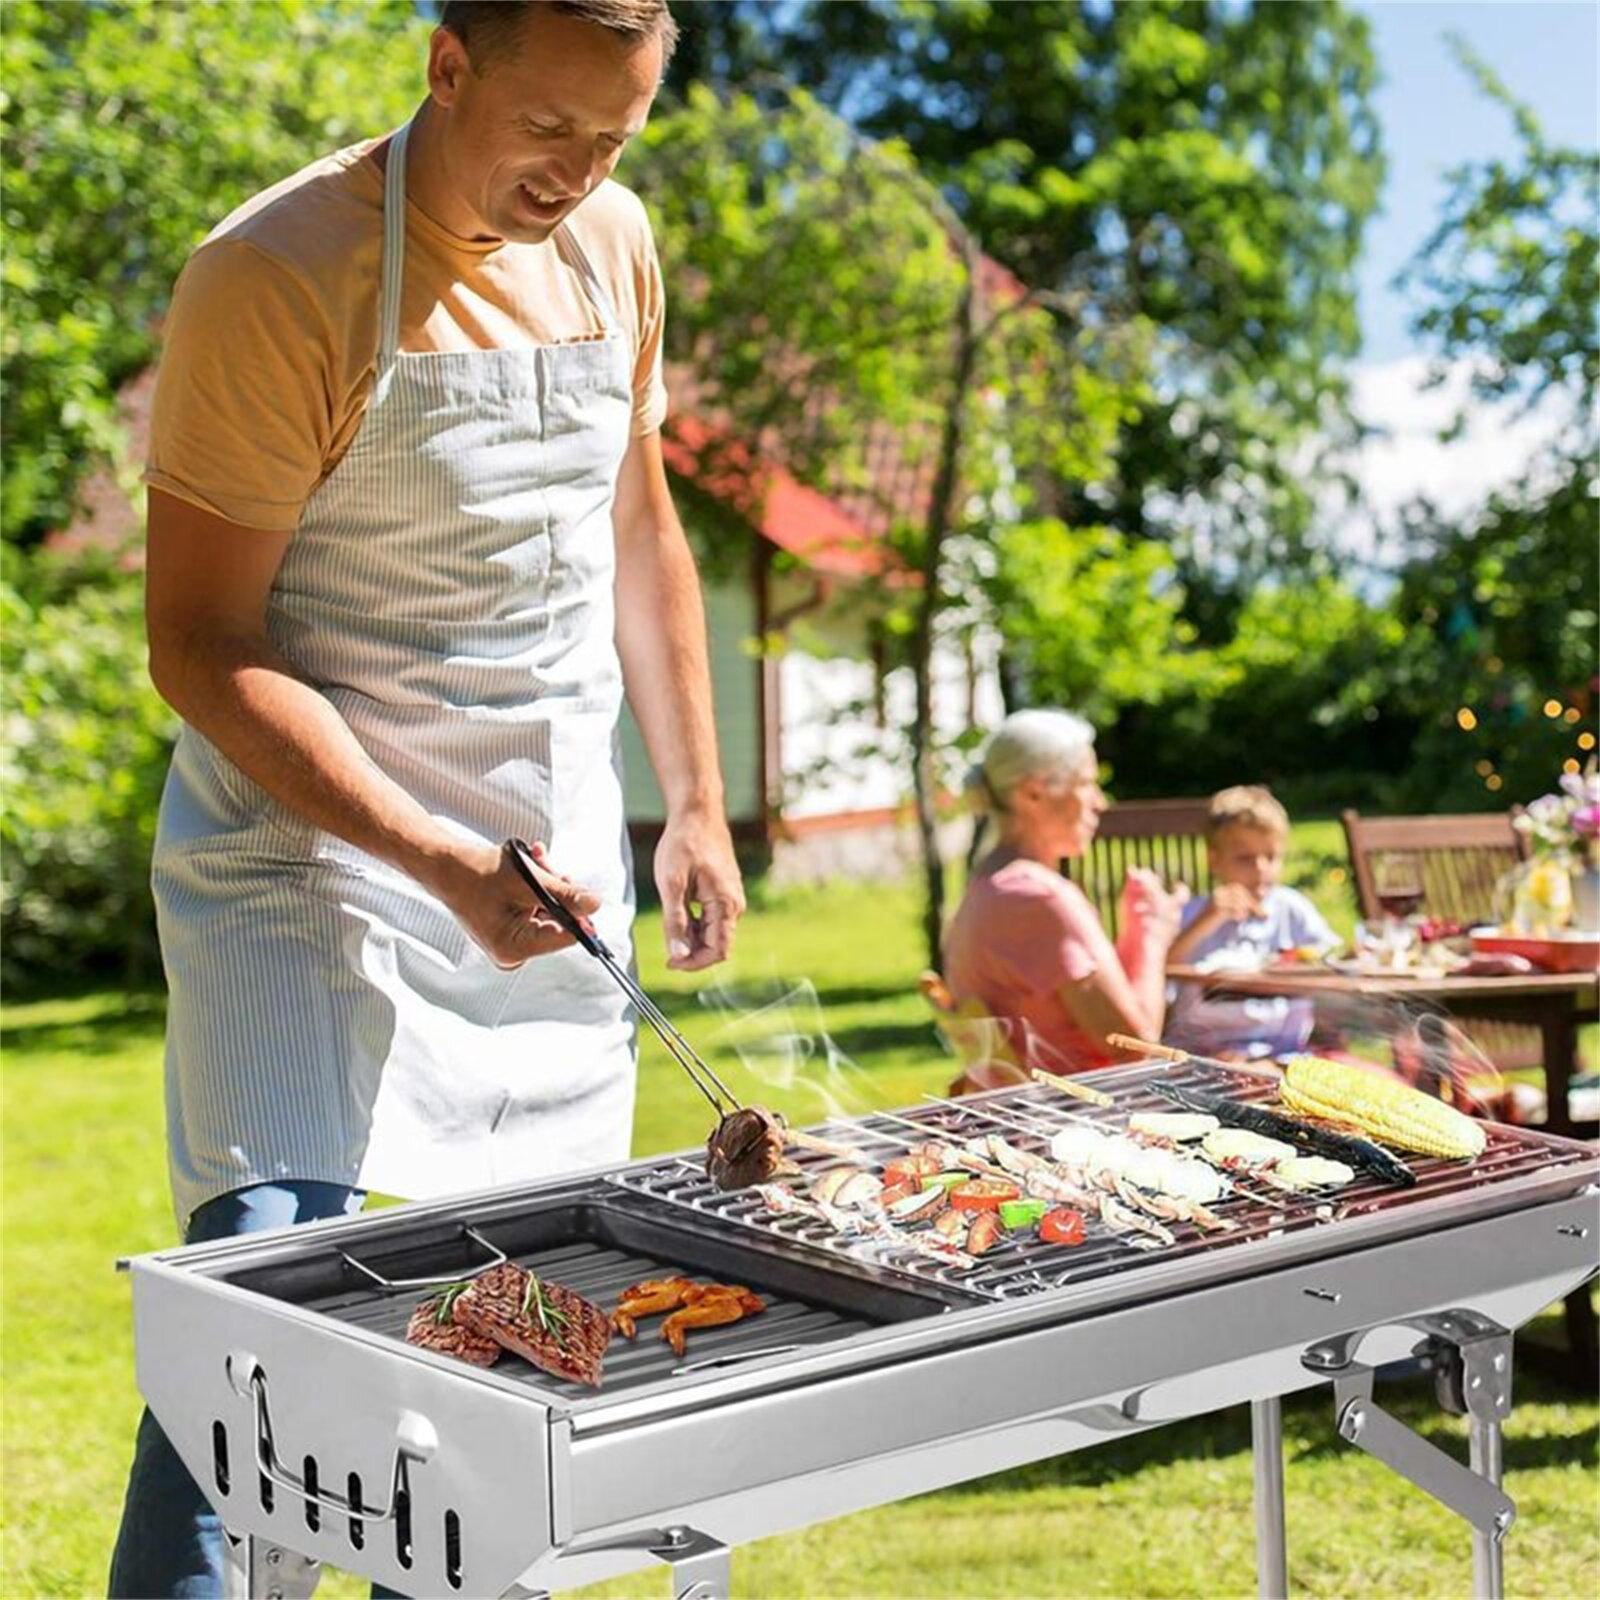 Smokeless Fold Barbecue Charcoal BBQ Grill Stove Shish Kebab Stainless Steel 